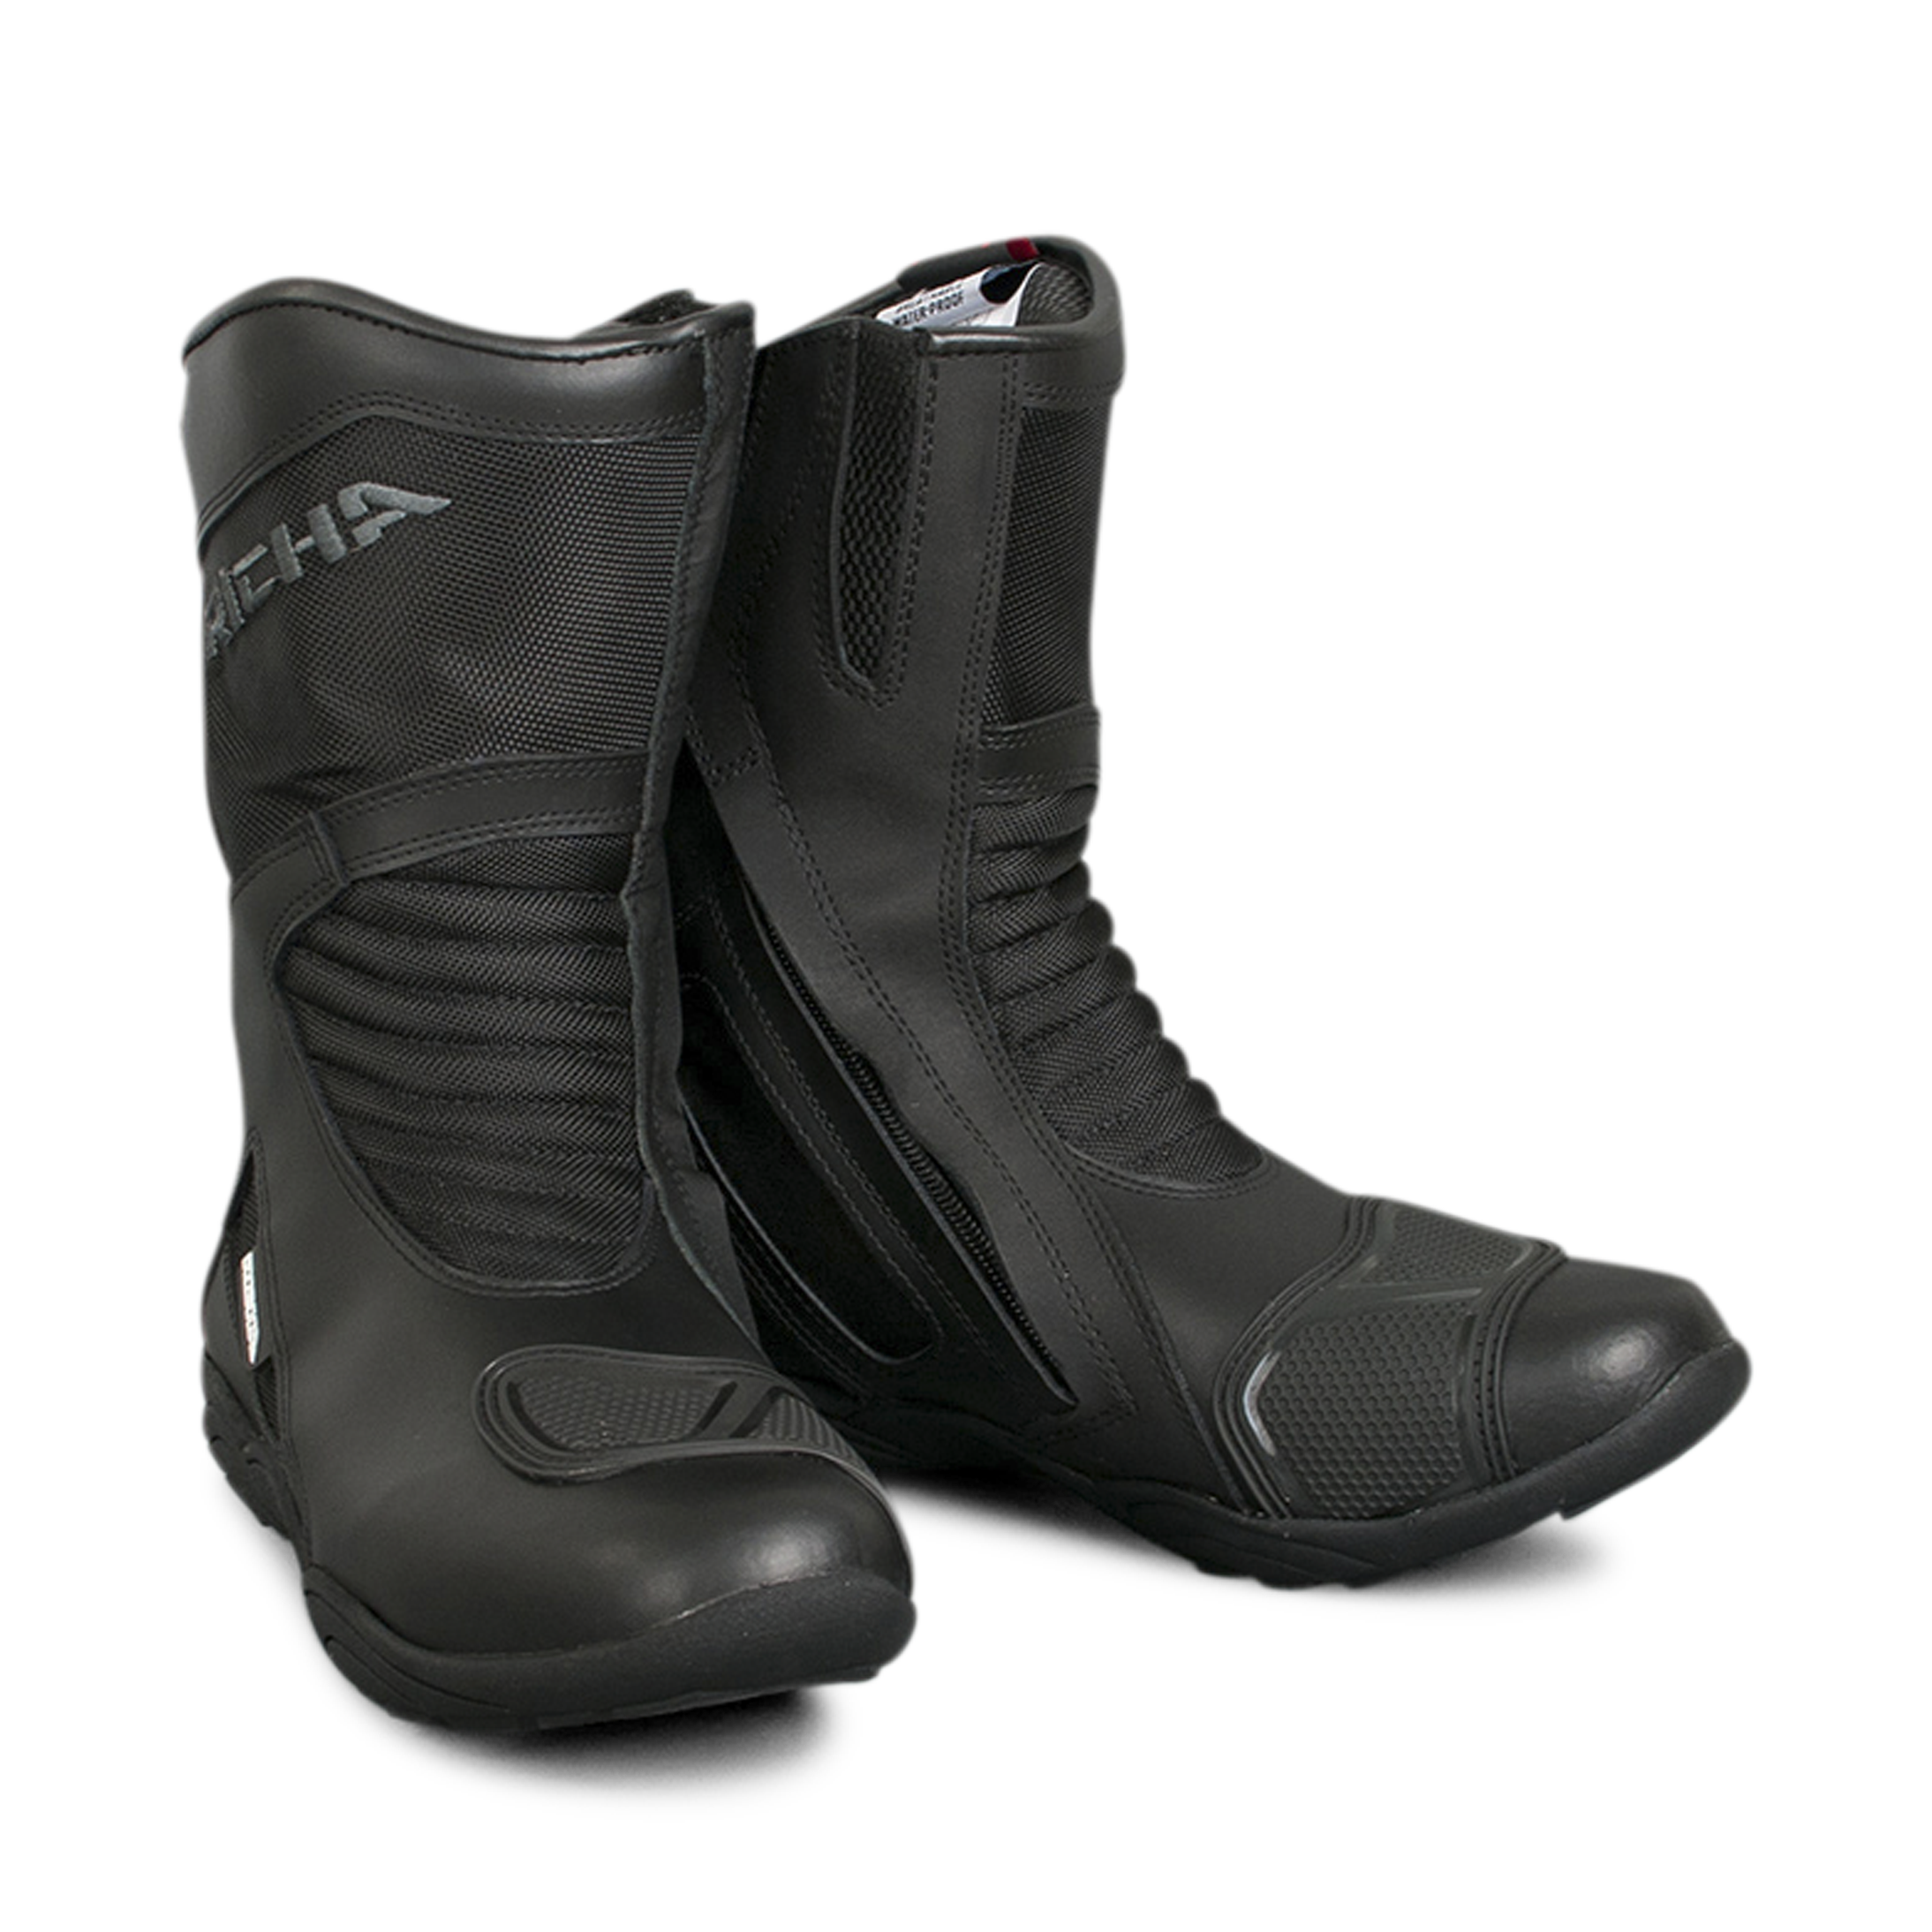 vulcan motorcycle boots